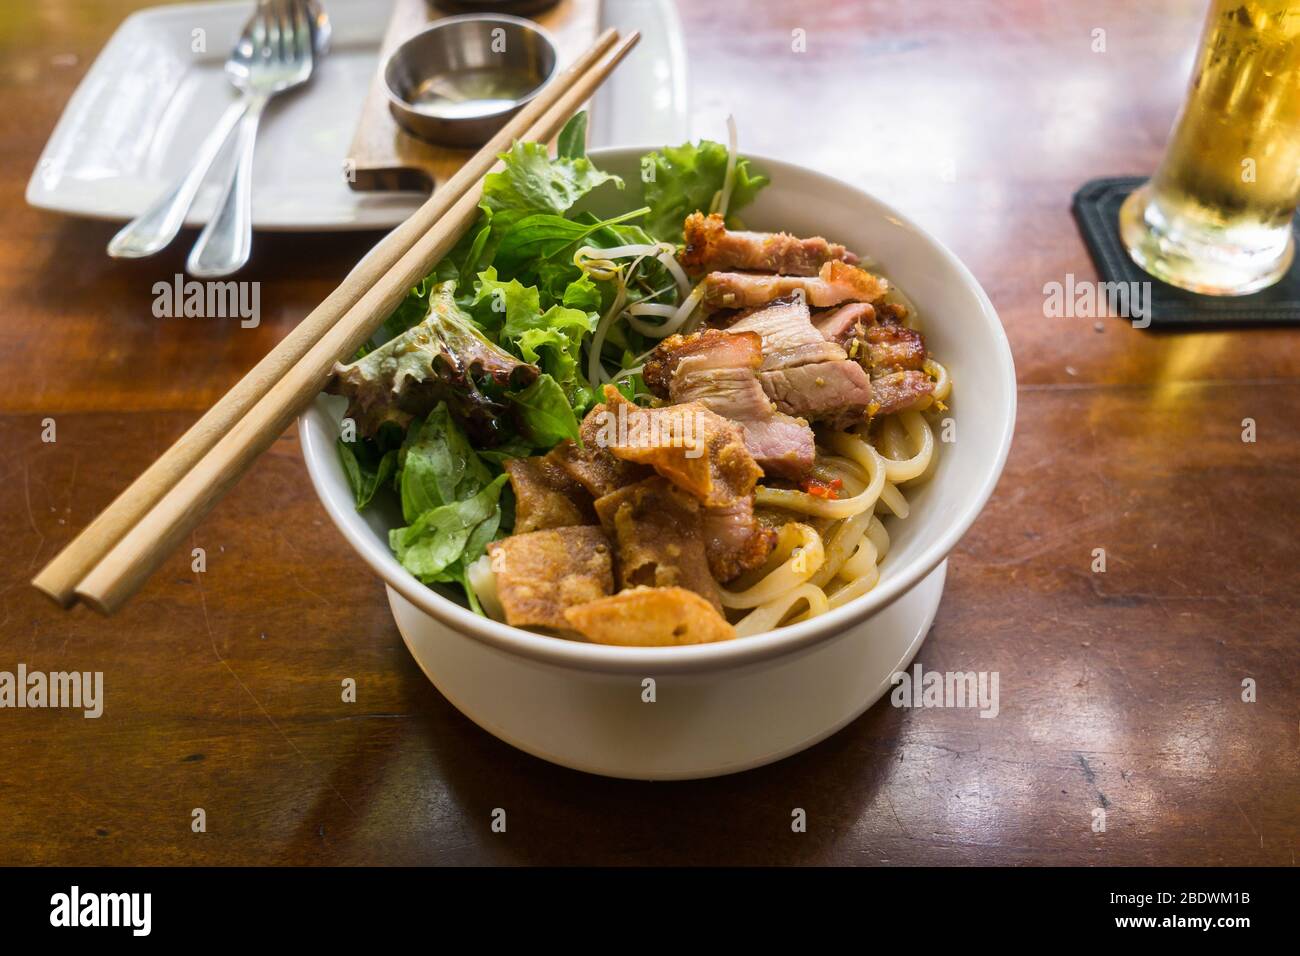 Hoi An Cao Lau - Rice Noodles With Barbecued Pork, Greens And Croutons, a specialty dish in Hoi An, Vietnam, Southeast Asia. Stock Photo